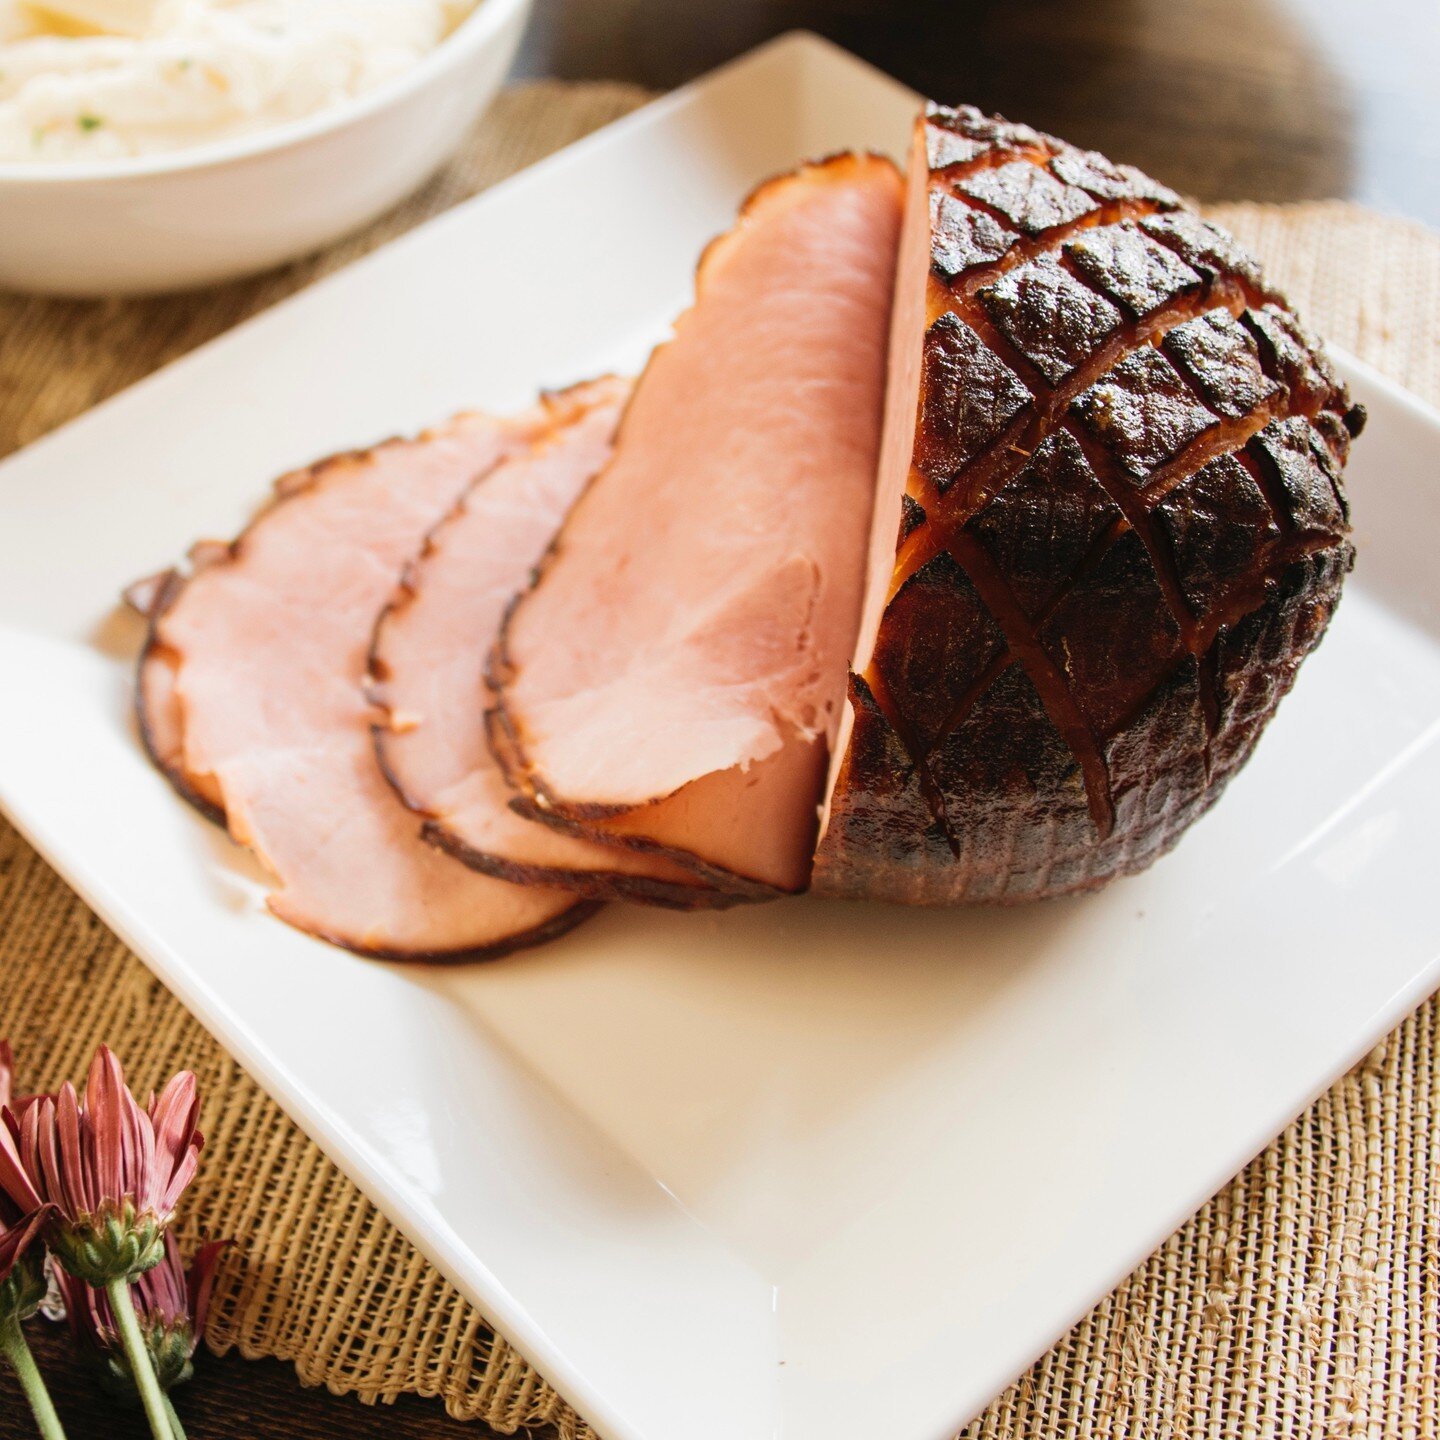 Add a little BBQ to your Easter celebration! We have Whole Smoked Honey Hams available exclusively for Easter Sunday. Don't forget the scratch sides, garlic rolls, and Little Pies for dessert! 
Today (4/5) is the last day to pre-order, pick-up on Apr